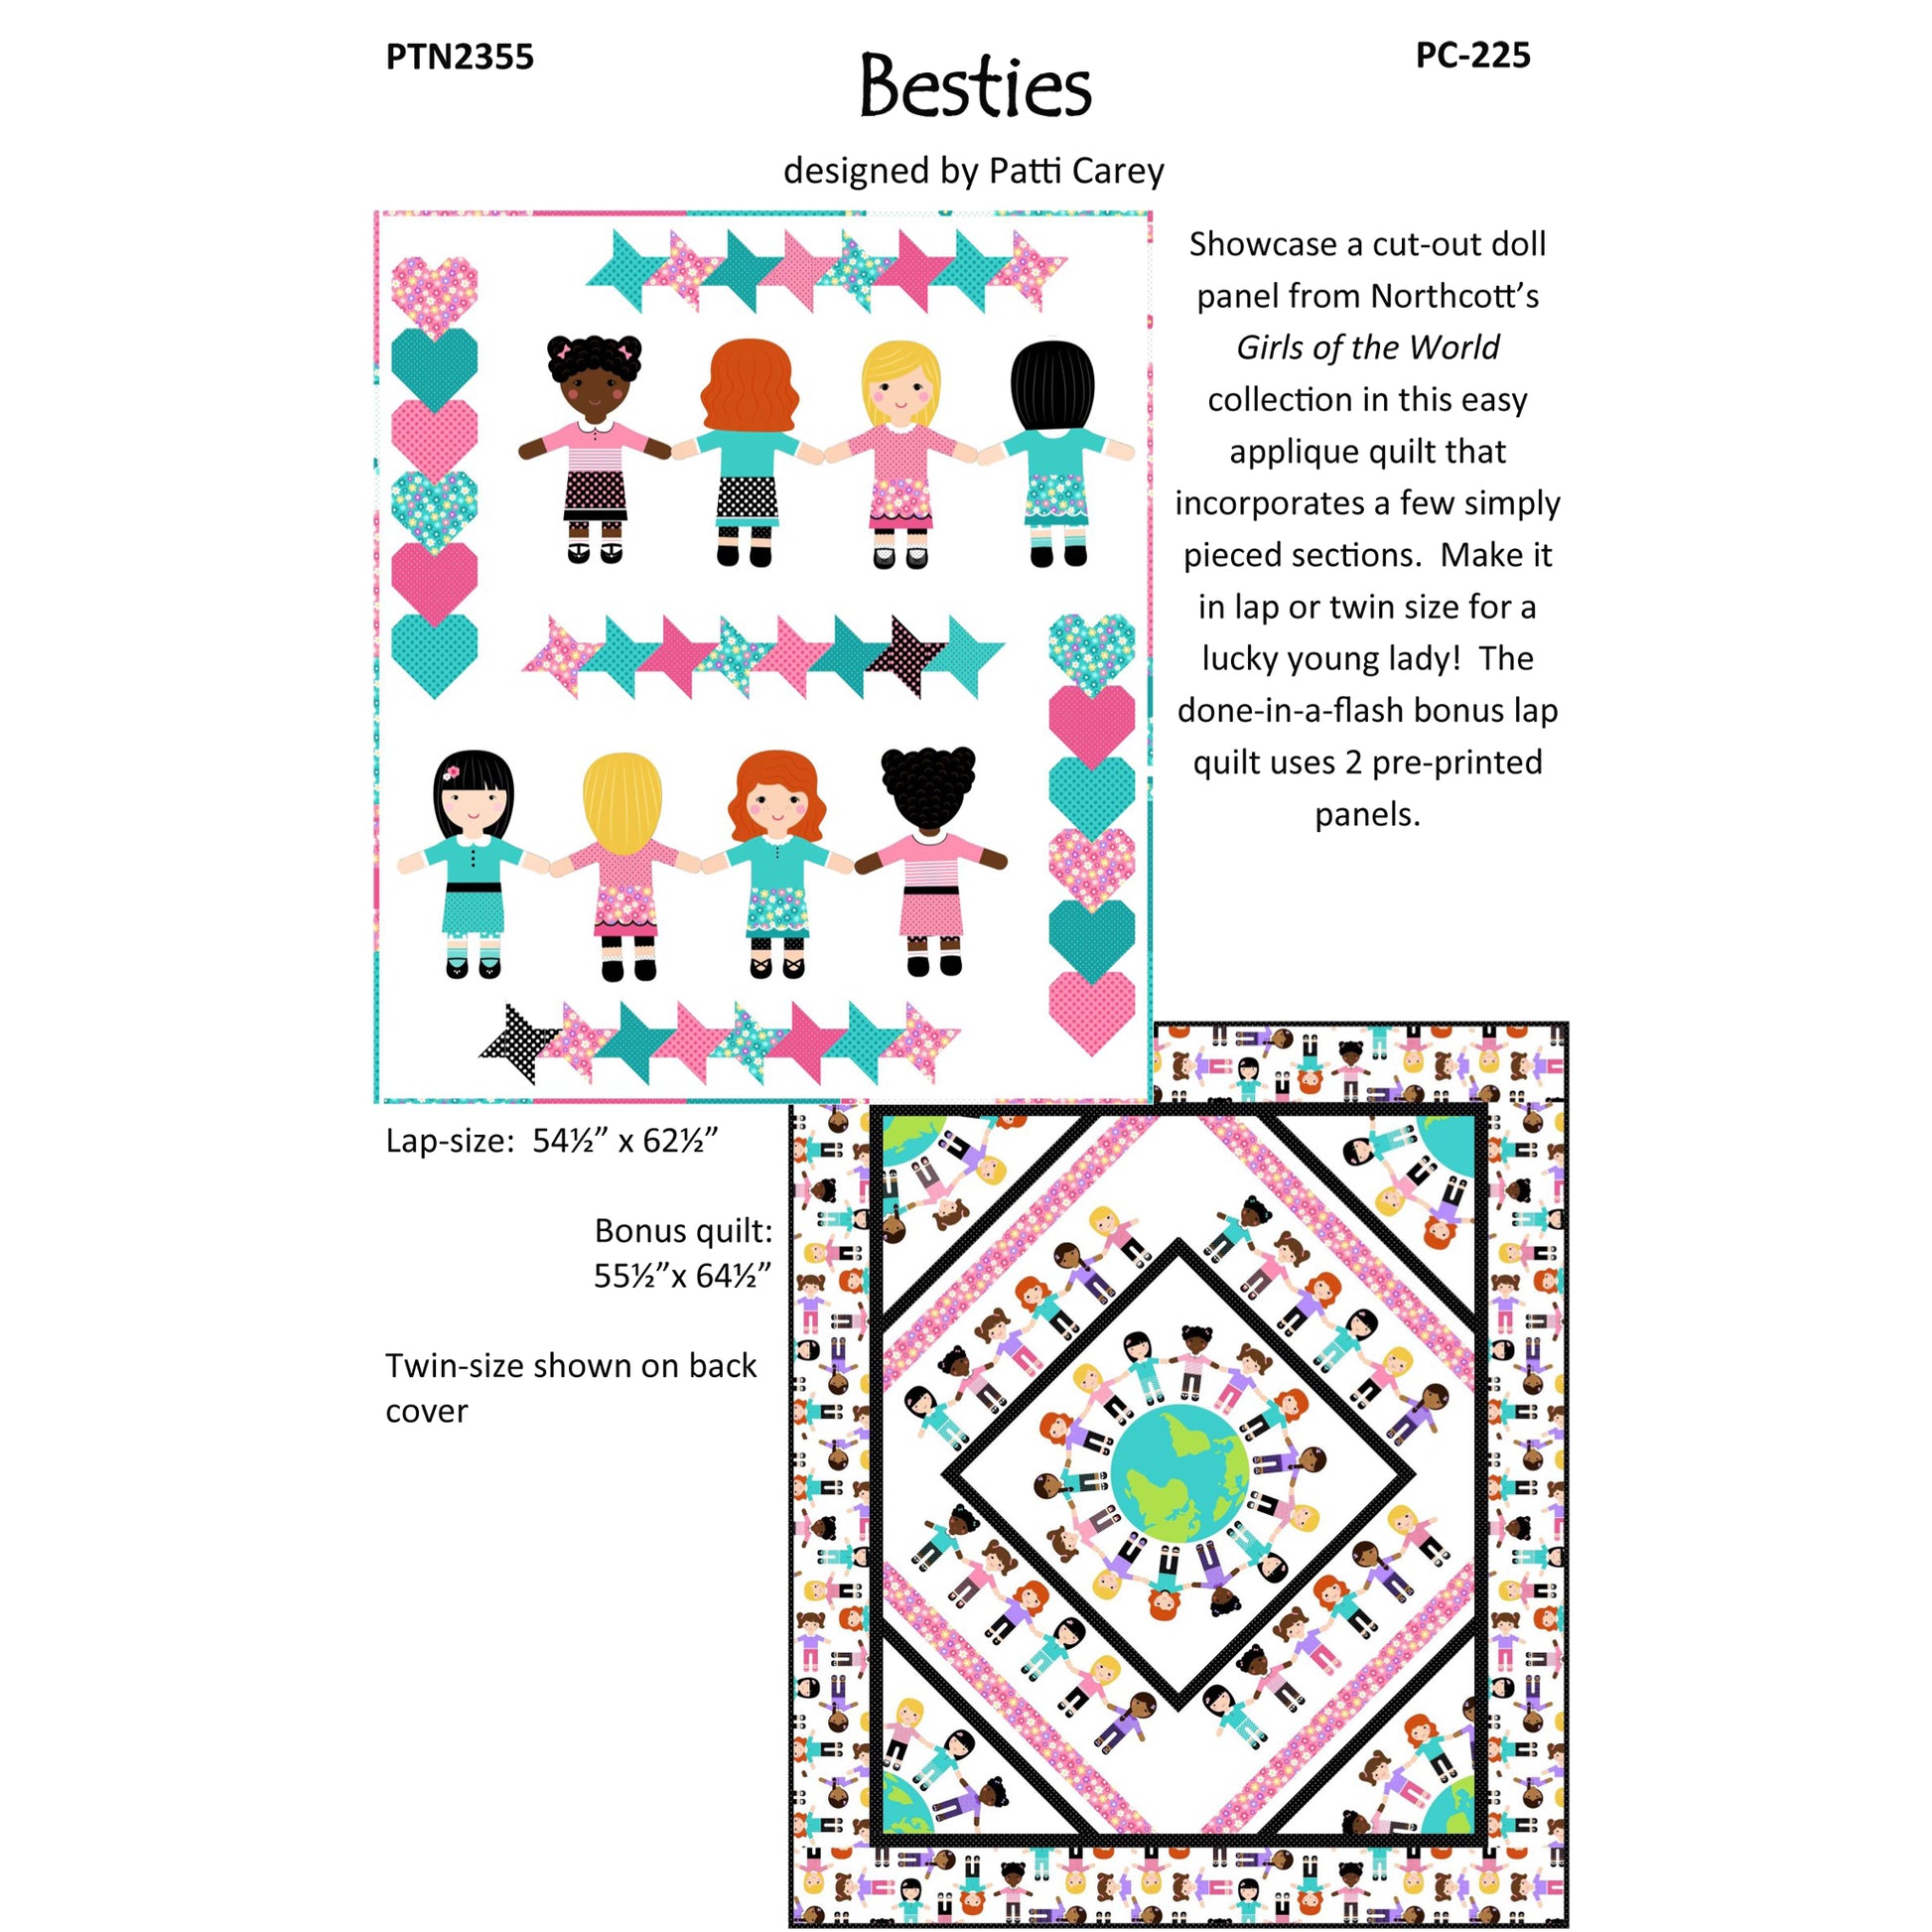 Cover image of pattern for Besties Quilt and bonus quilt.